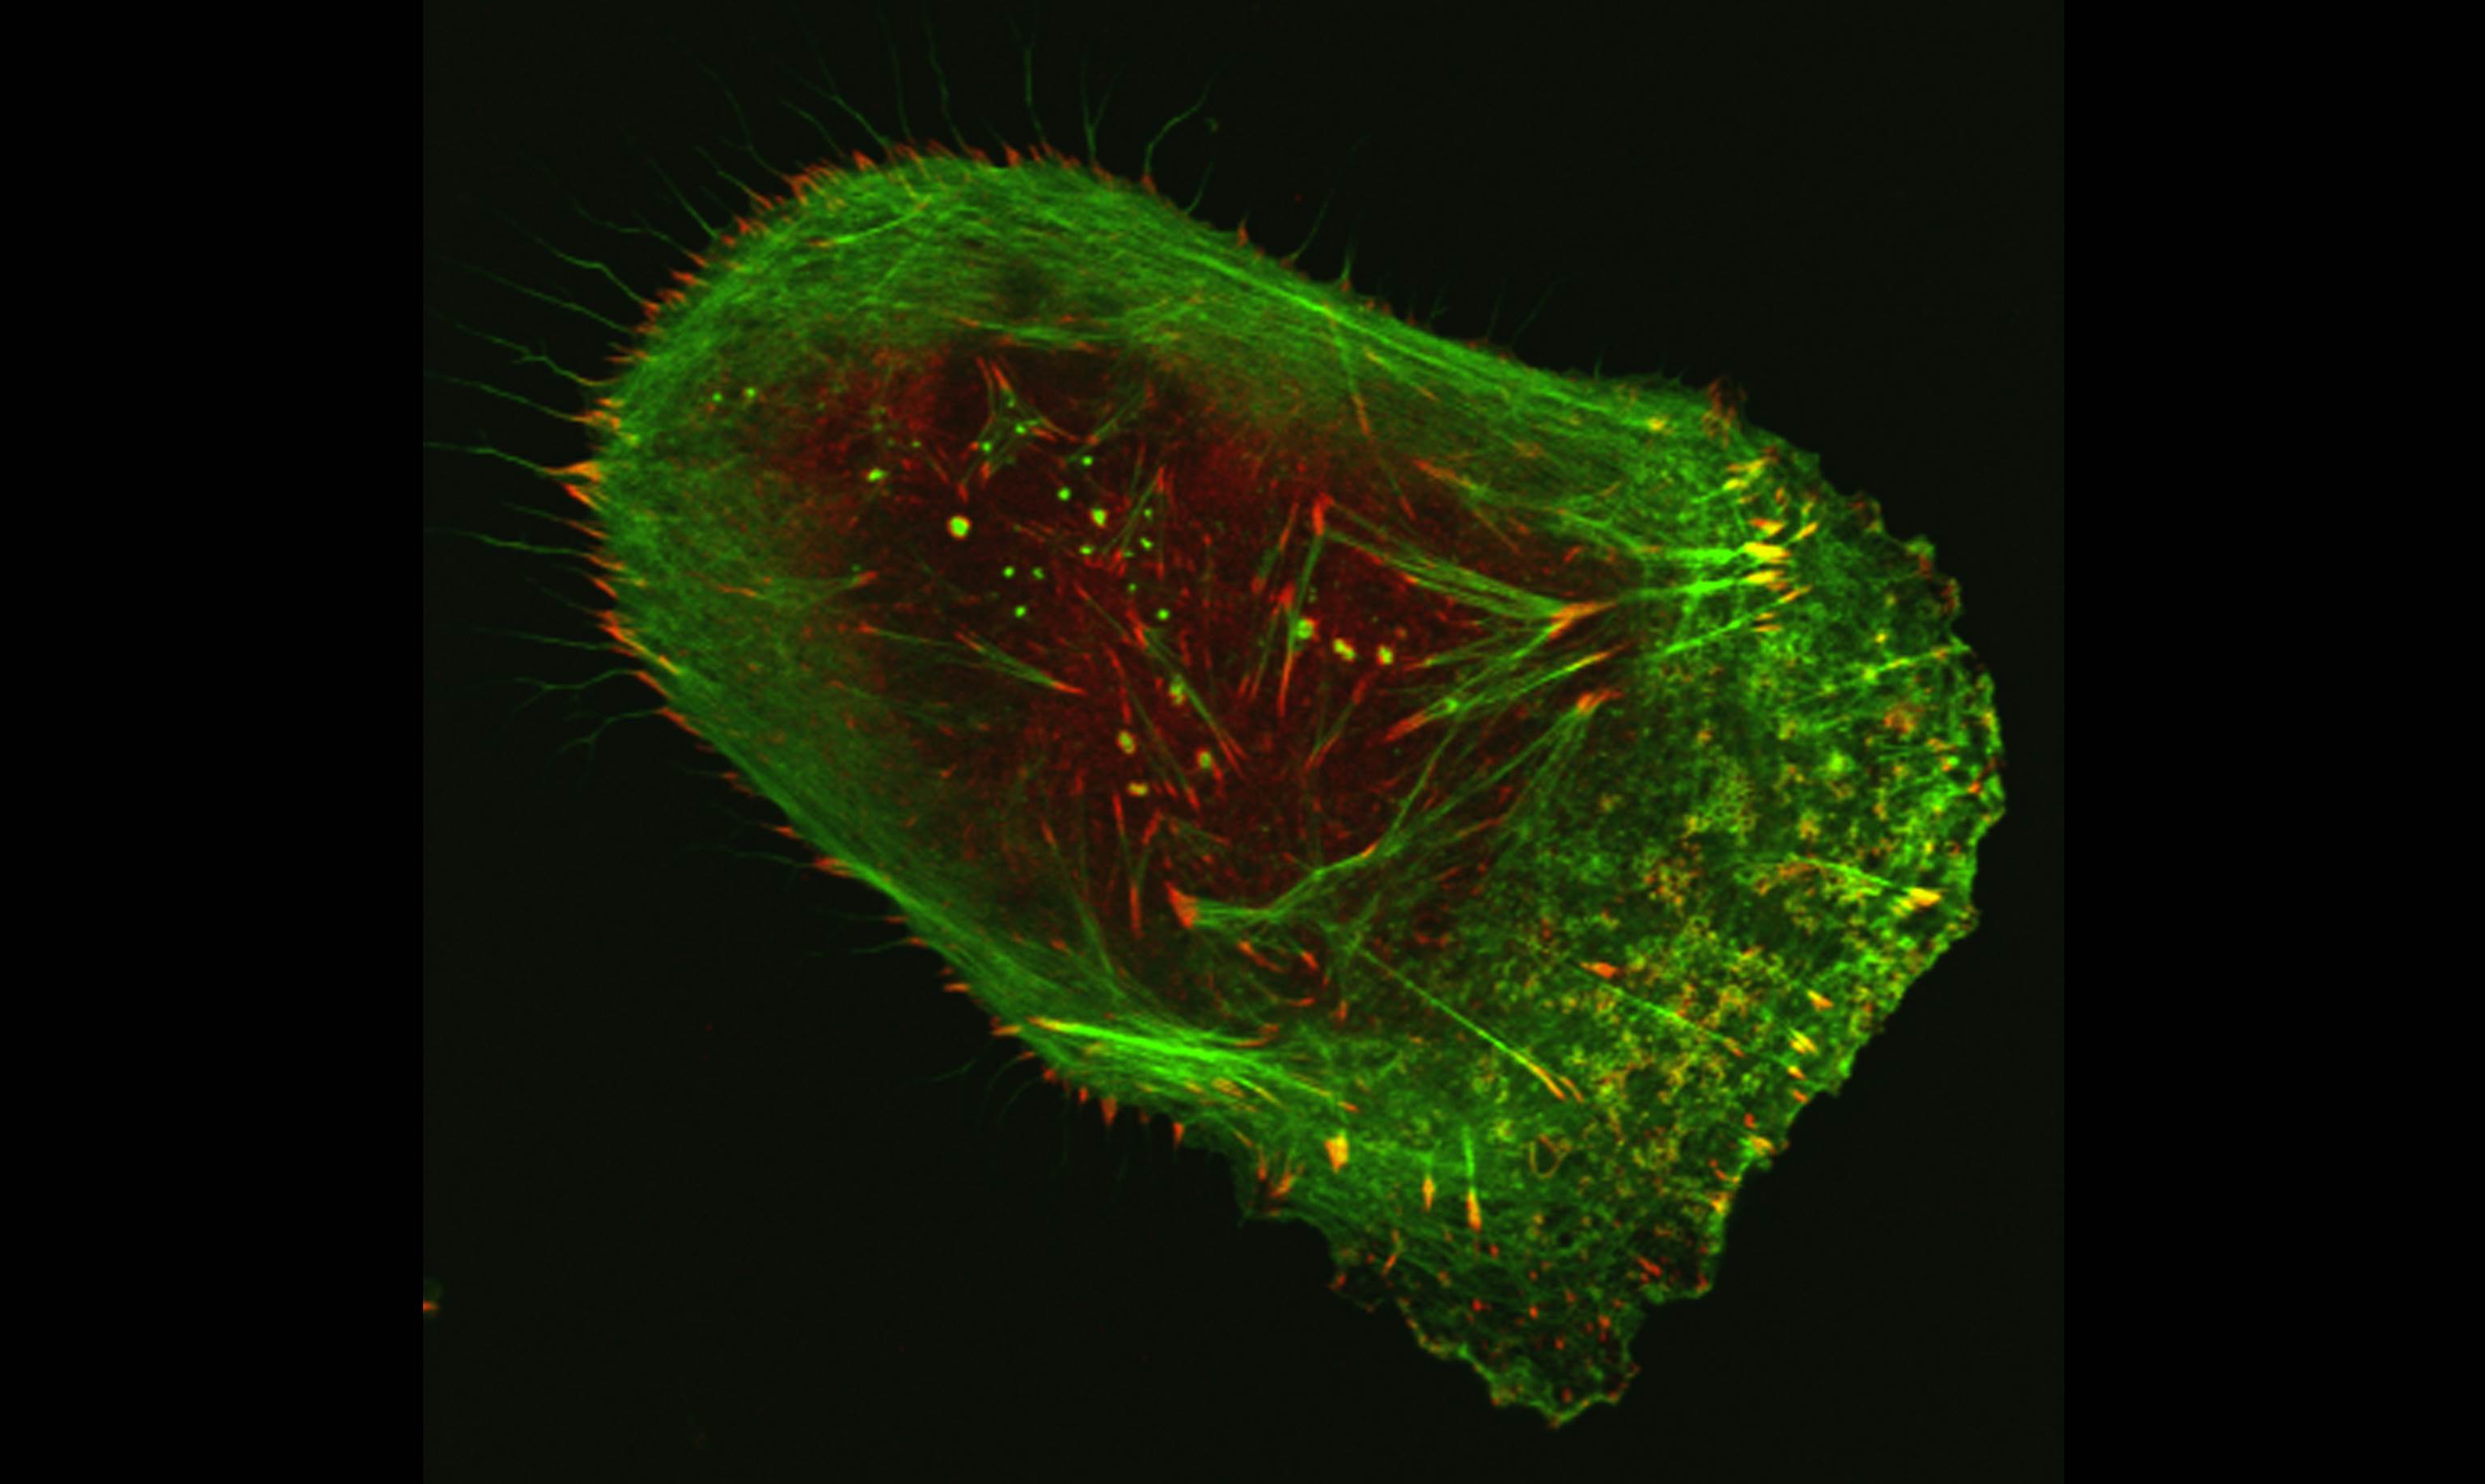 Human malignant melanoma cell viewed through a fluorescent, laser-scanning confocal microscope.